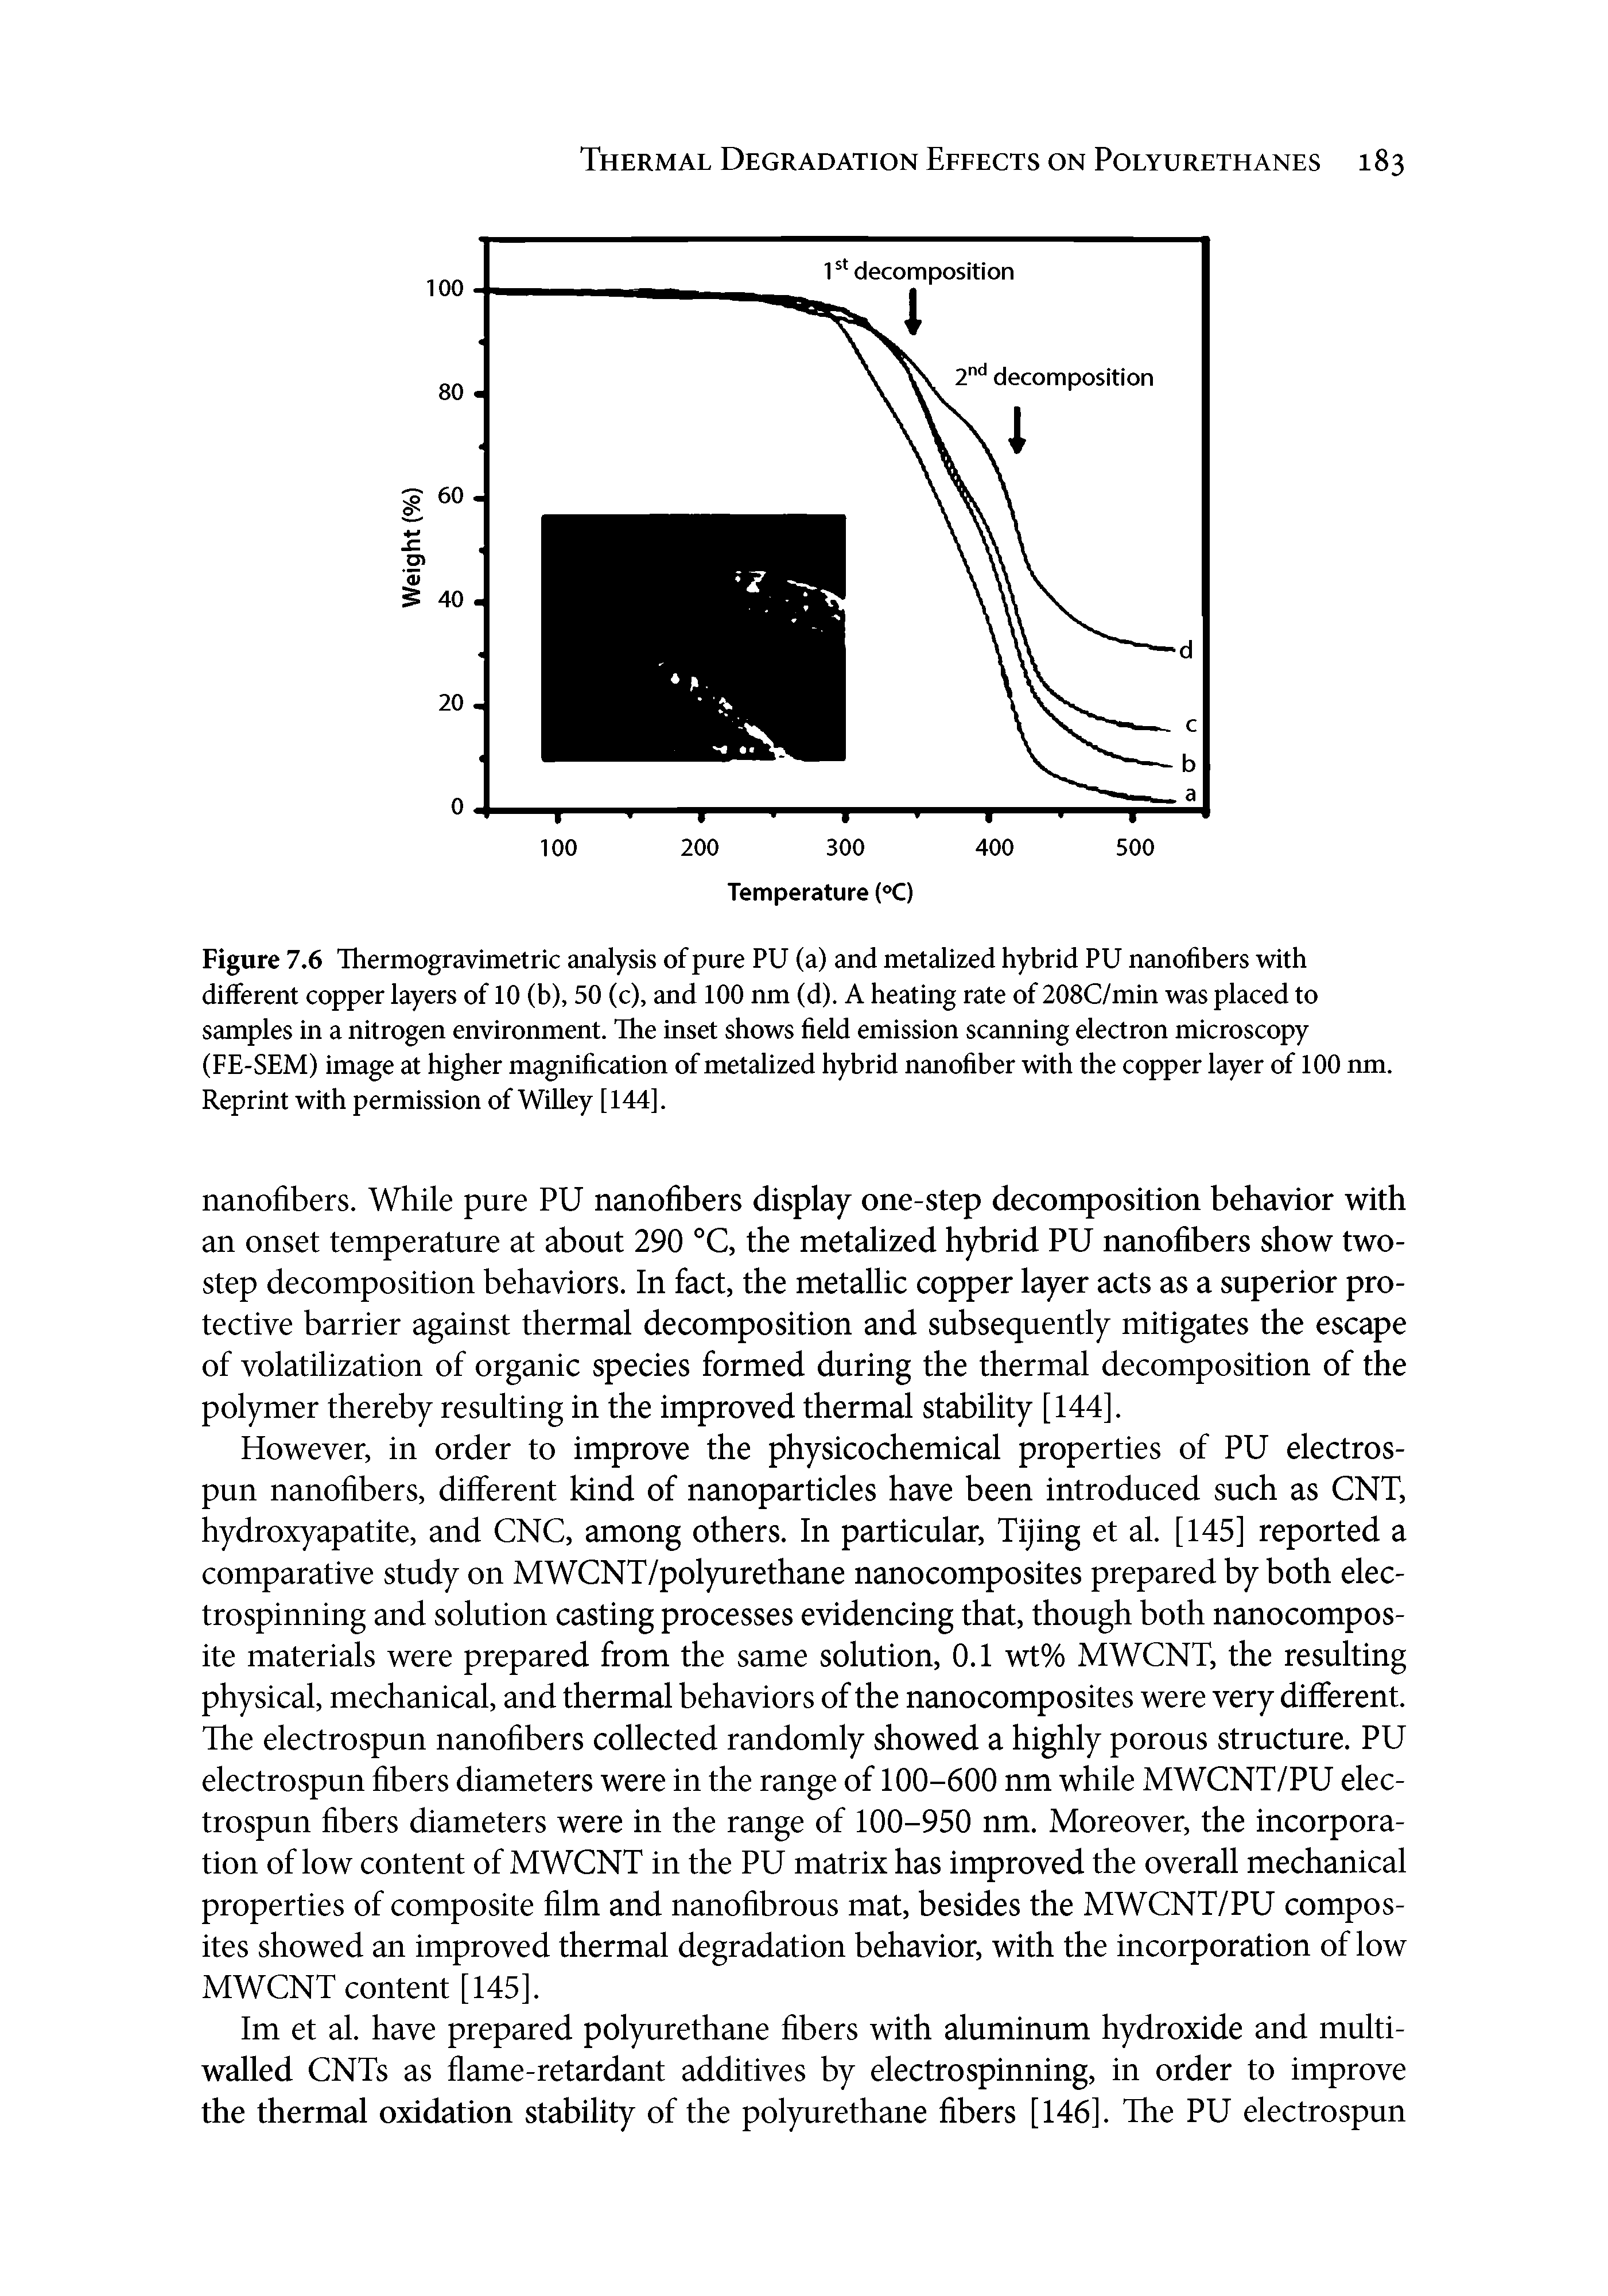 Figure 7.6 Thermogravimetric analysis of pure PU (a) and metalized hybrid PU nanofibers with diflferent copper layers of 10 (b), 50 (c), and 100 nm (d). A heating rate of 208C/min was placed to samples in a nitrogen environment. The inset shows field emission scanning electron microscopy (FE-SEM) image at higher magnification of metalized hybrid nanofiber with the copper layer of 100 nm. Reprint with permission of Willey [144],...